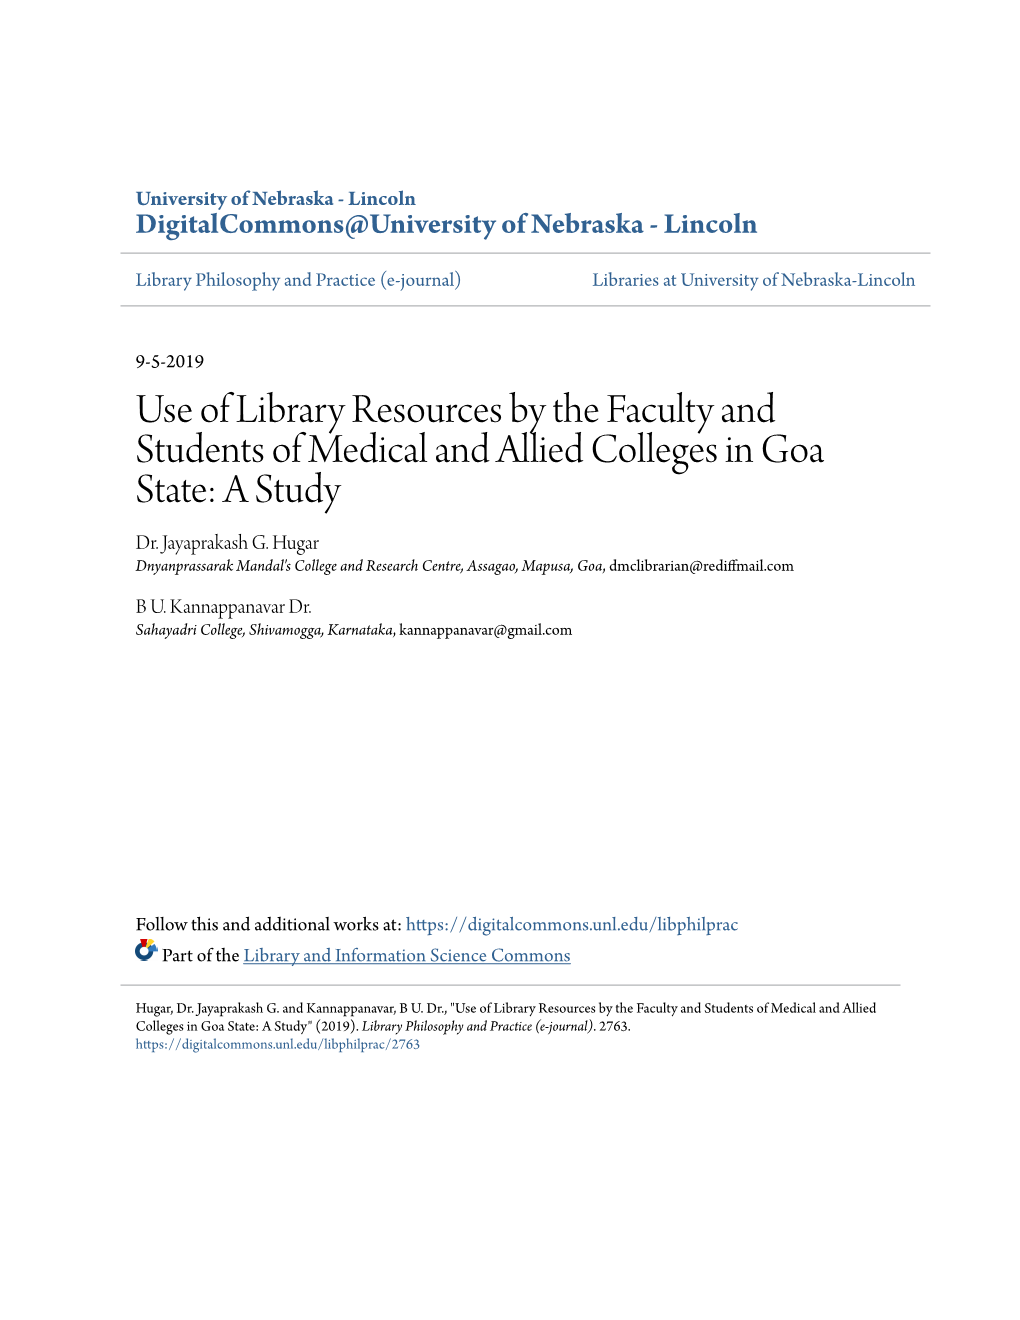 Use of Library Resources by the Faculty and Students of Medical and Allied Colleges in Goa State: a Study Dr